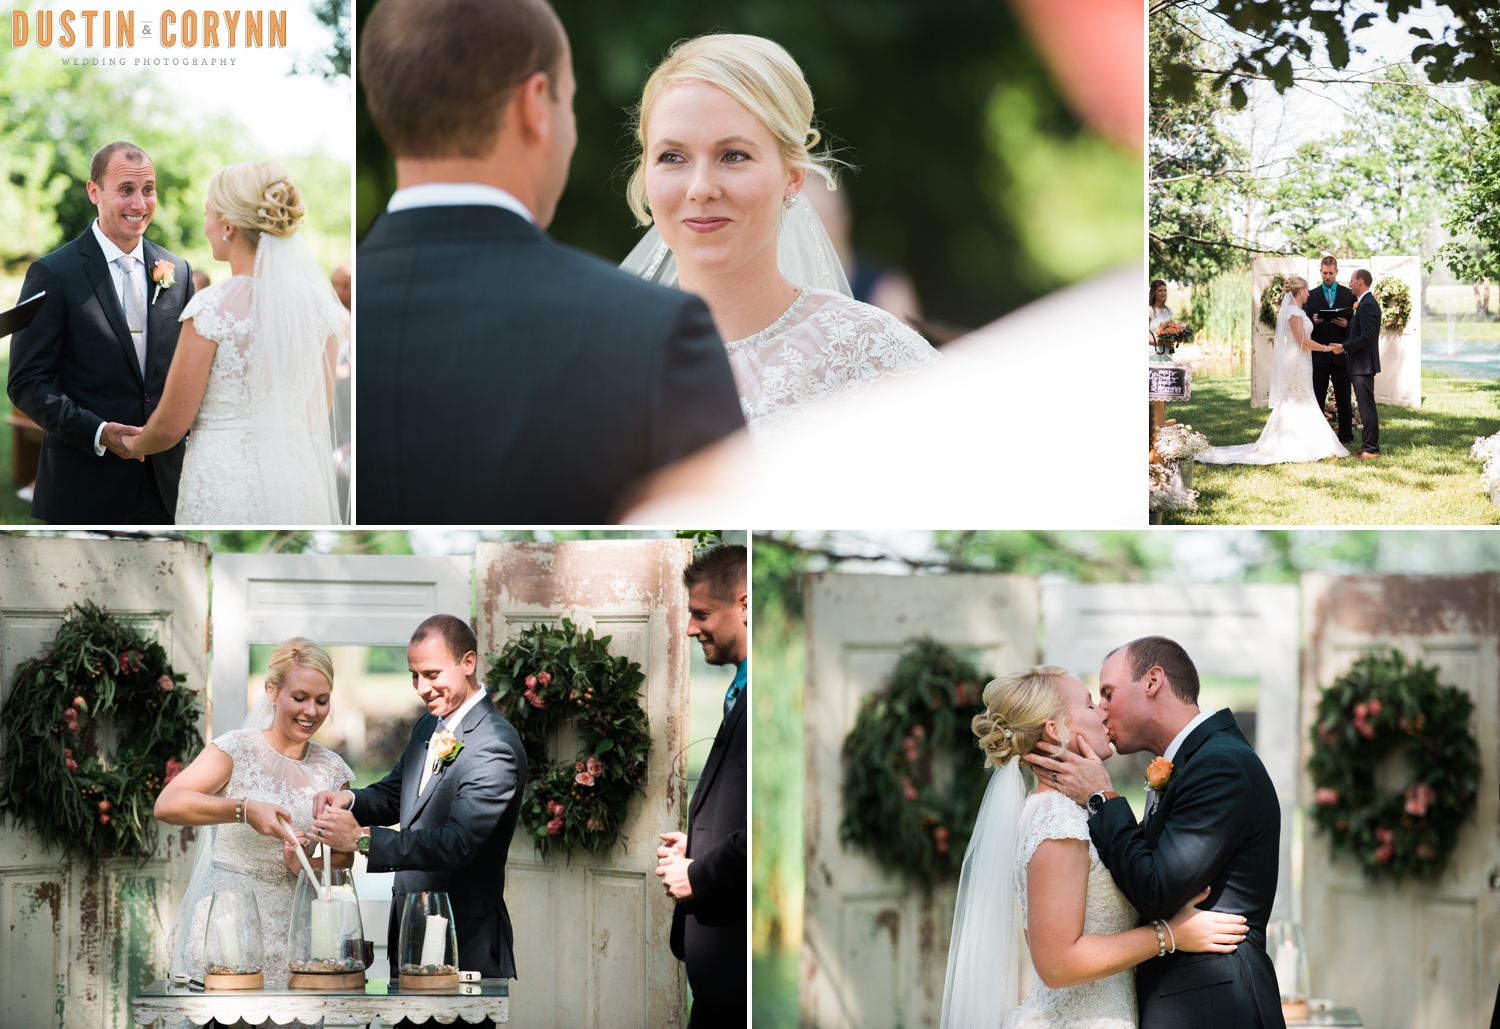 Indianapolis Wedding Photography - Dustin and Corynn Photography 10